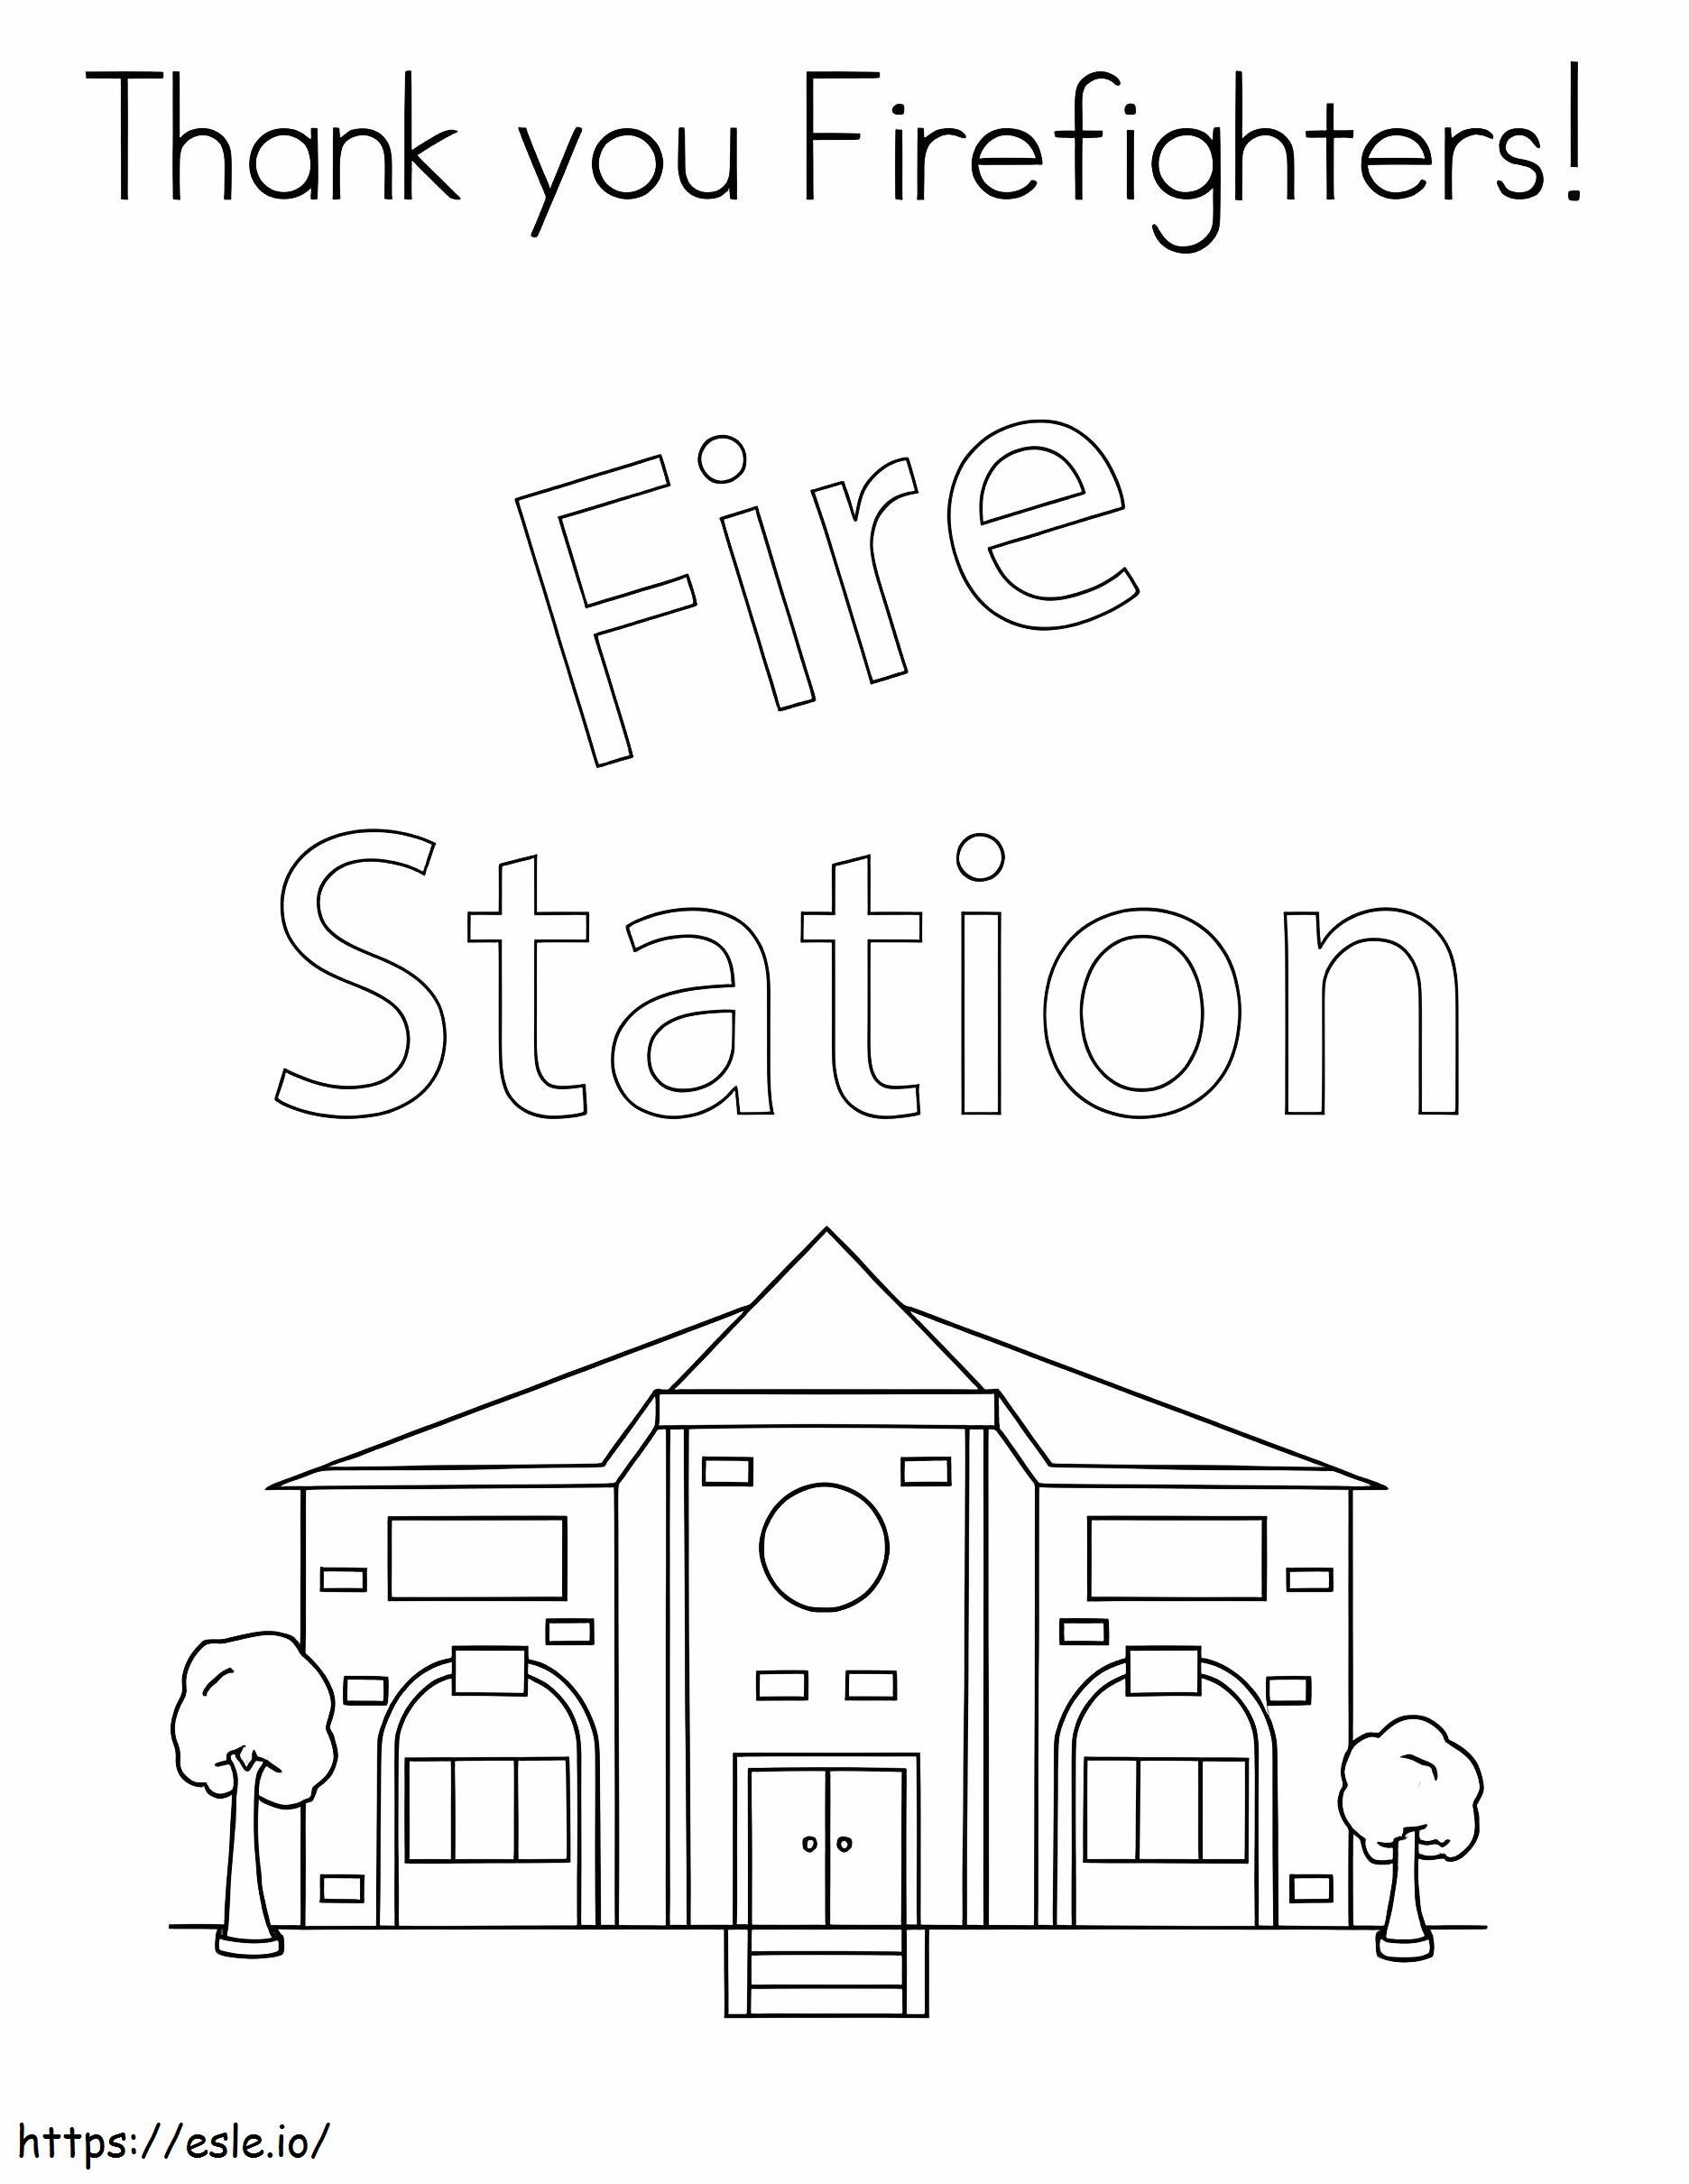 Fire Station 2 coloring page